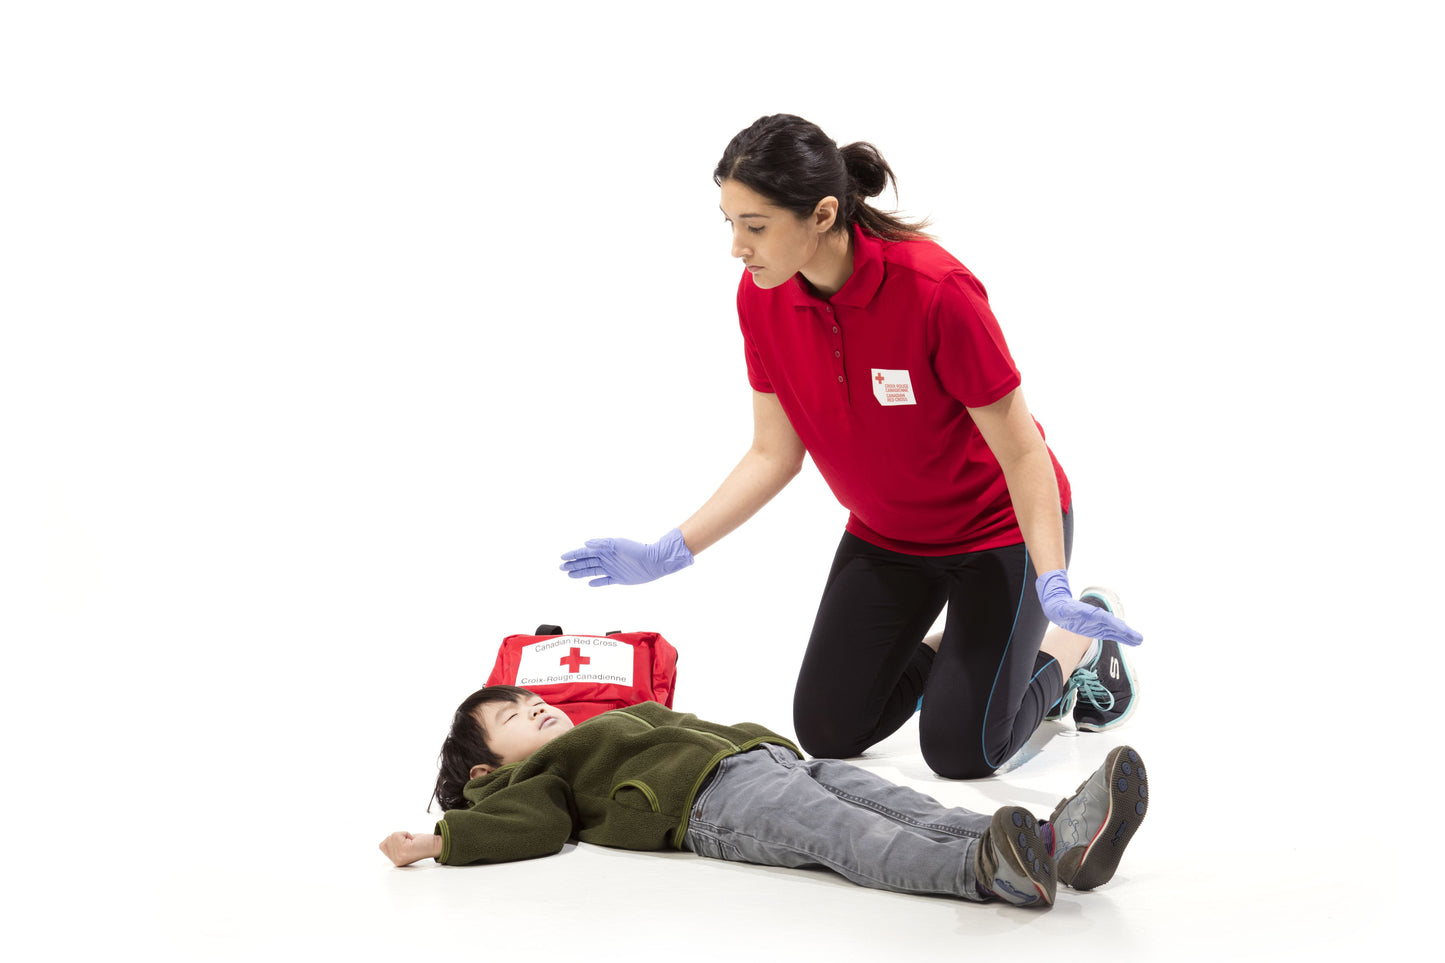 A female first aider, wearing appropriate medical attire, attentively assessing an unresponsive child. The image depicts a compassionate and focused responder checking for vital signs and providing initial care. This scene reflects a caring and professional approach to emergency response.